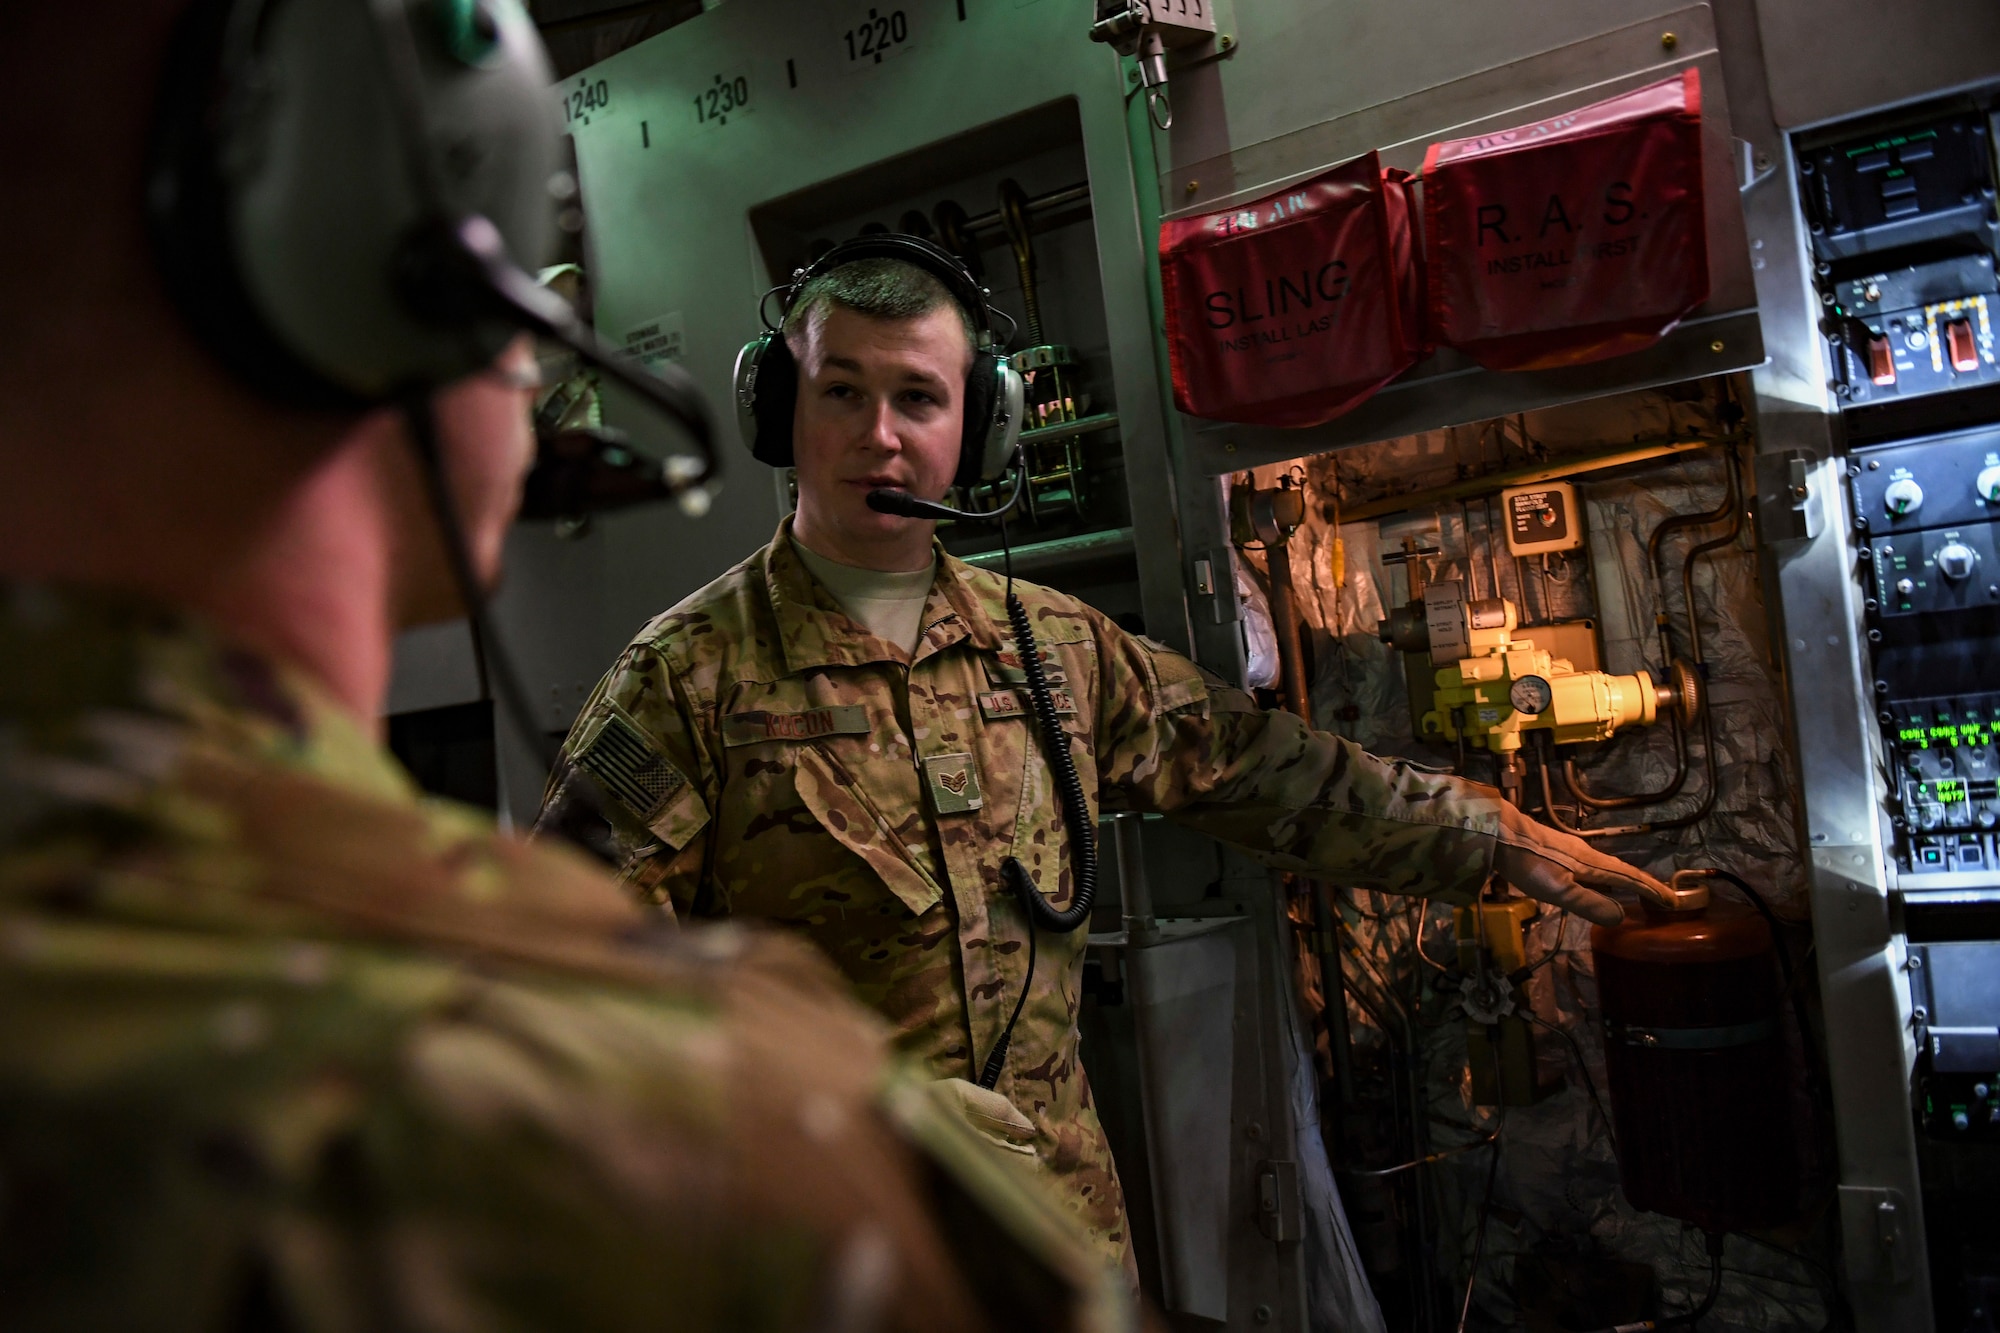 Staff Sgt. Carl Kocon, loadmaster with the 758th Airlift Squadron explains different parts of the hydraulic system to Senior Airman Steven Strobel, loadmaster with the 758th AS, during a training flight to March Air Reserve Base, California, March 3, 2019. Loadmasters might have to use the hydraulic system to add hydraulic fluid into the lines manually during an in-flight emergency, making this a vital training requirement. (U.S. Air Force photo by Joshua J. Seybert)